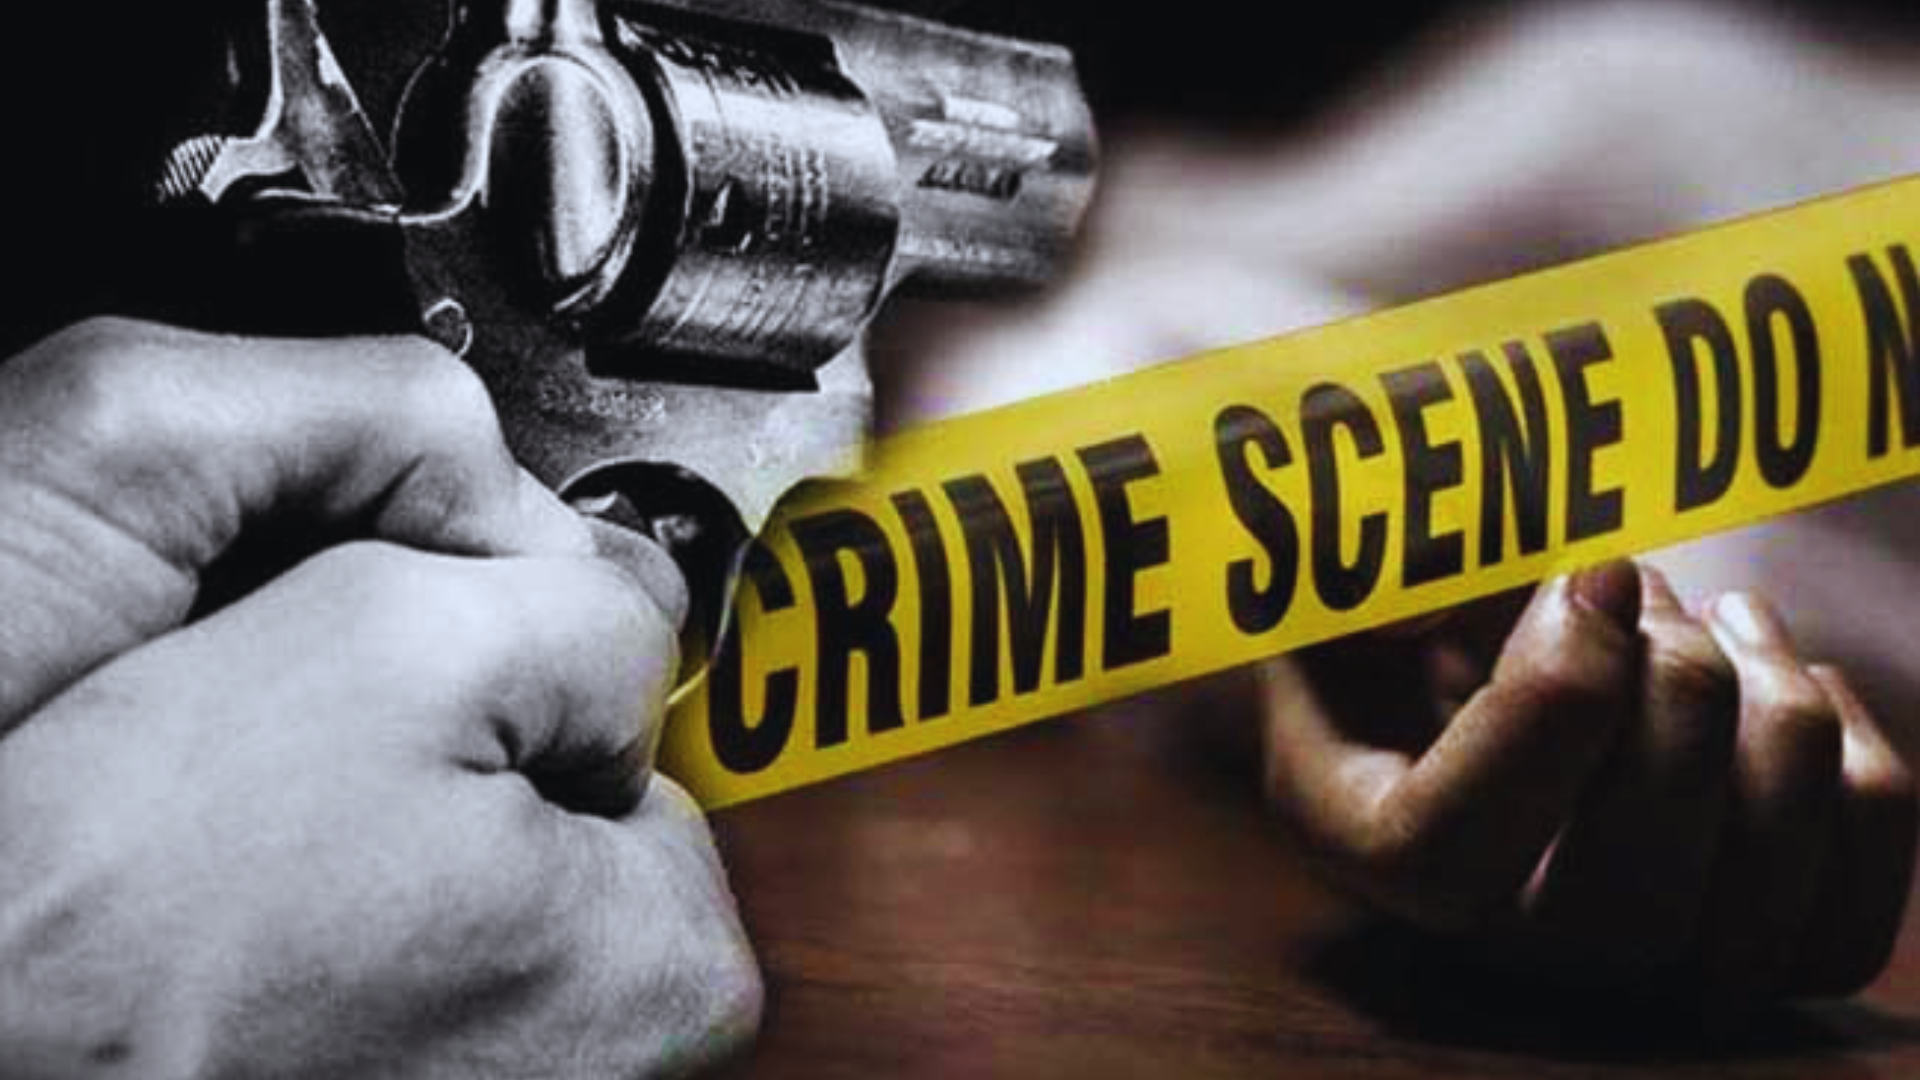 A 24-year-old Fatally Shot, Another Injured in Seelampur, Delhi